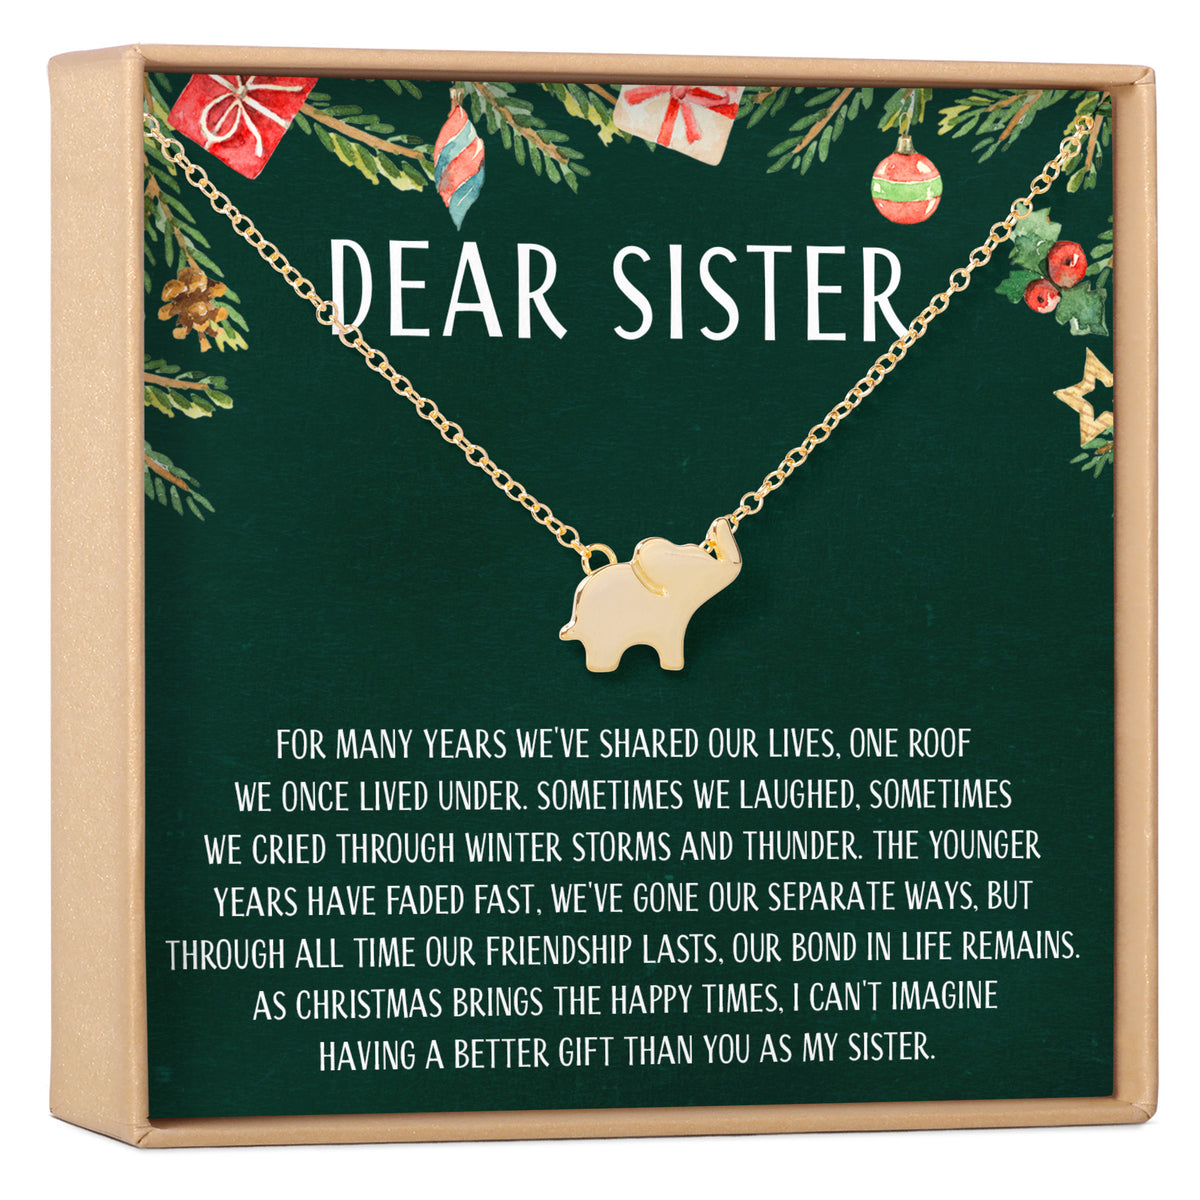 13 Christmas Gifts For Your Sister She'll Love - beautyheaven